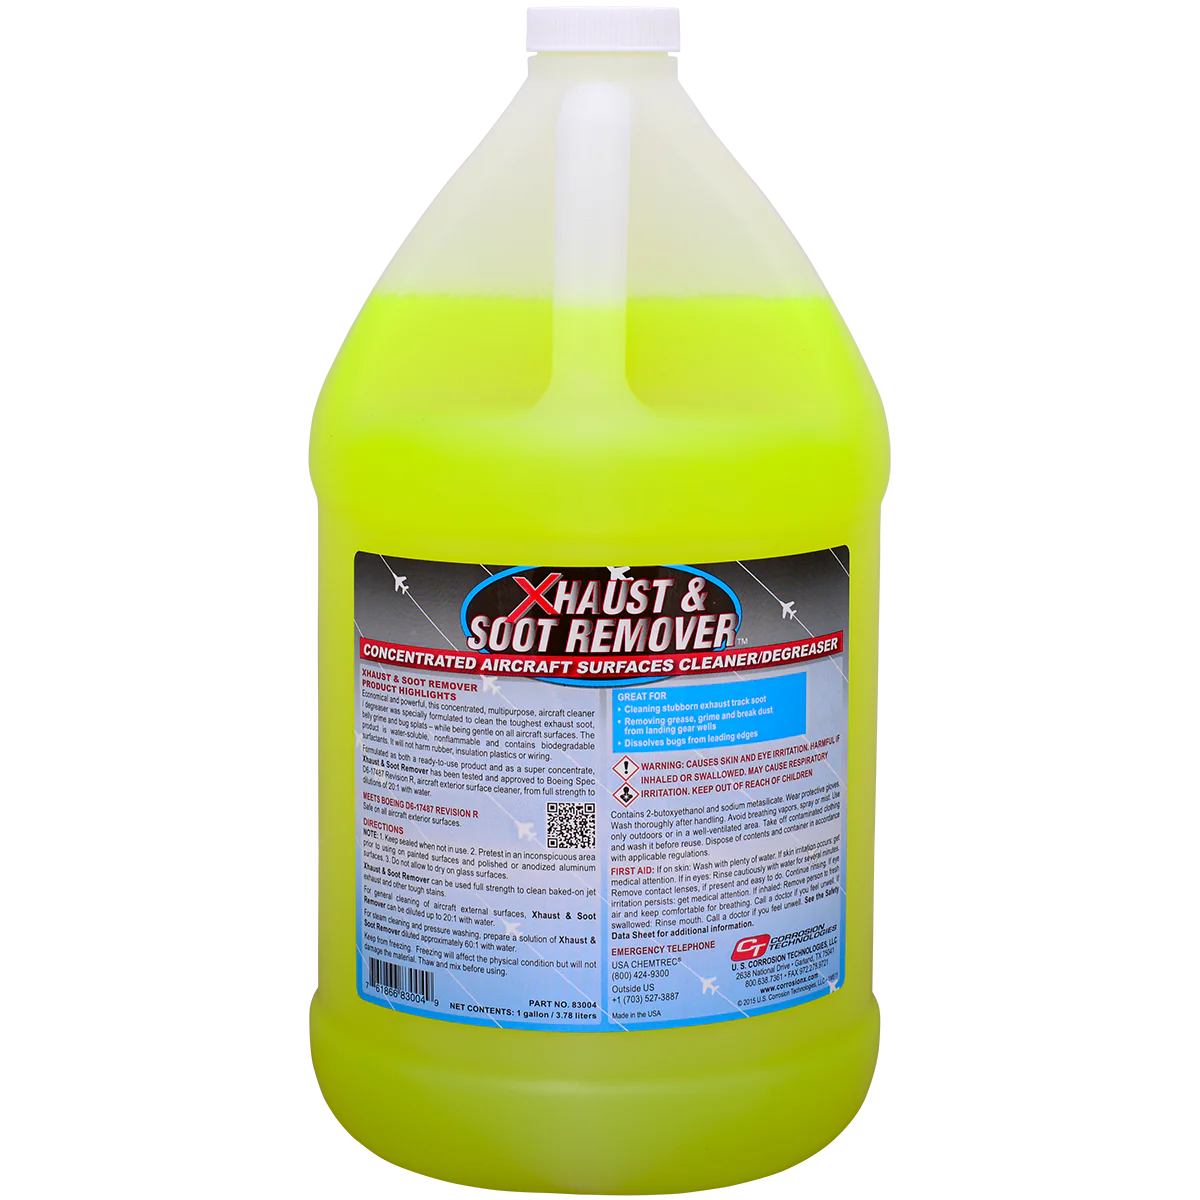 Xhaust & Soot Remover 1 Gallon